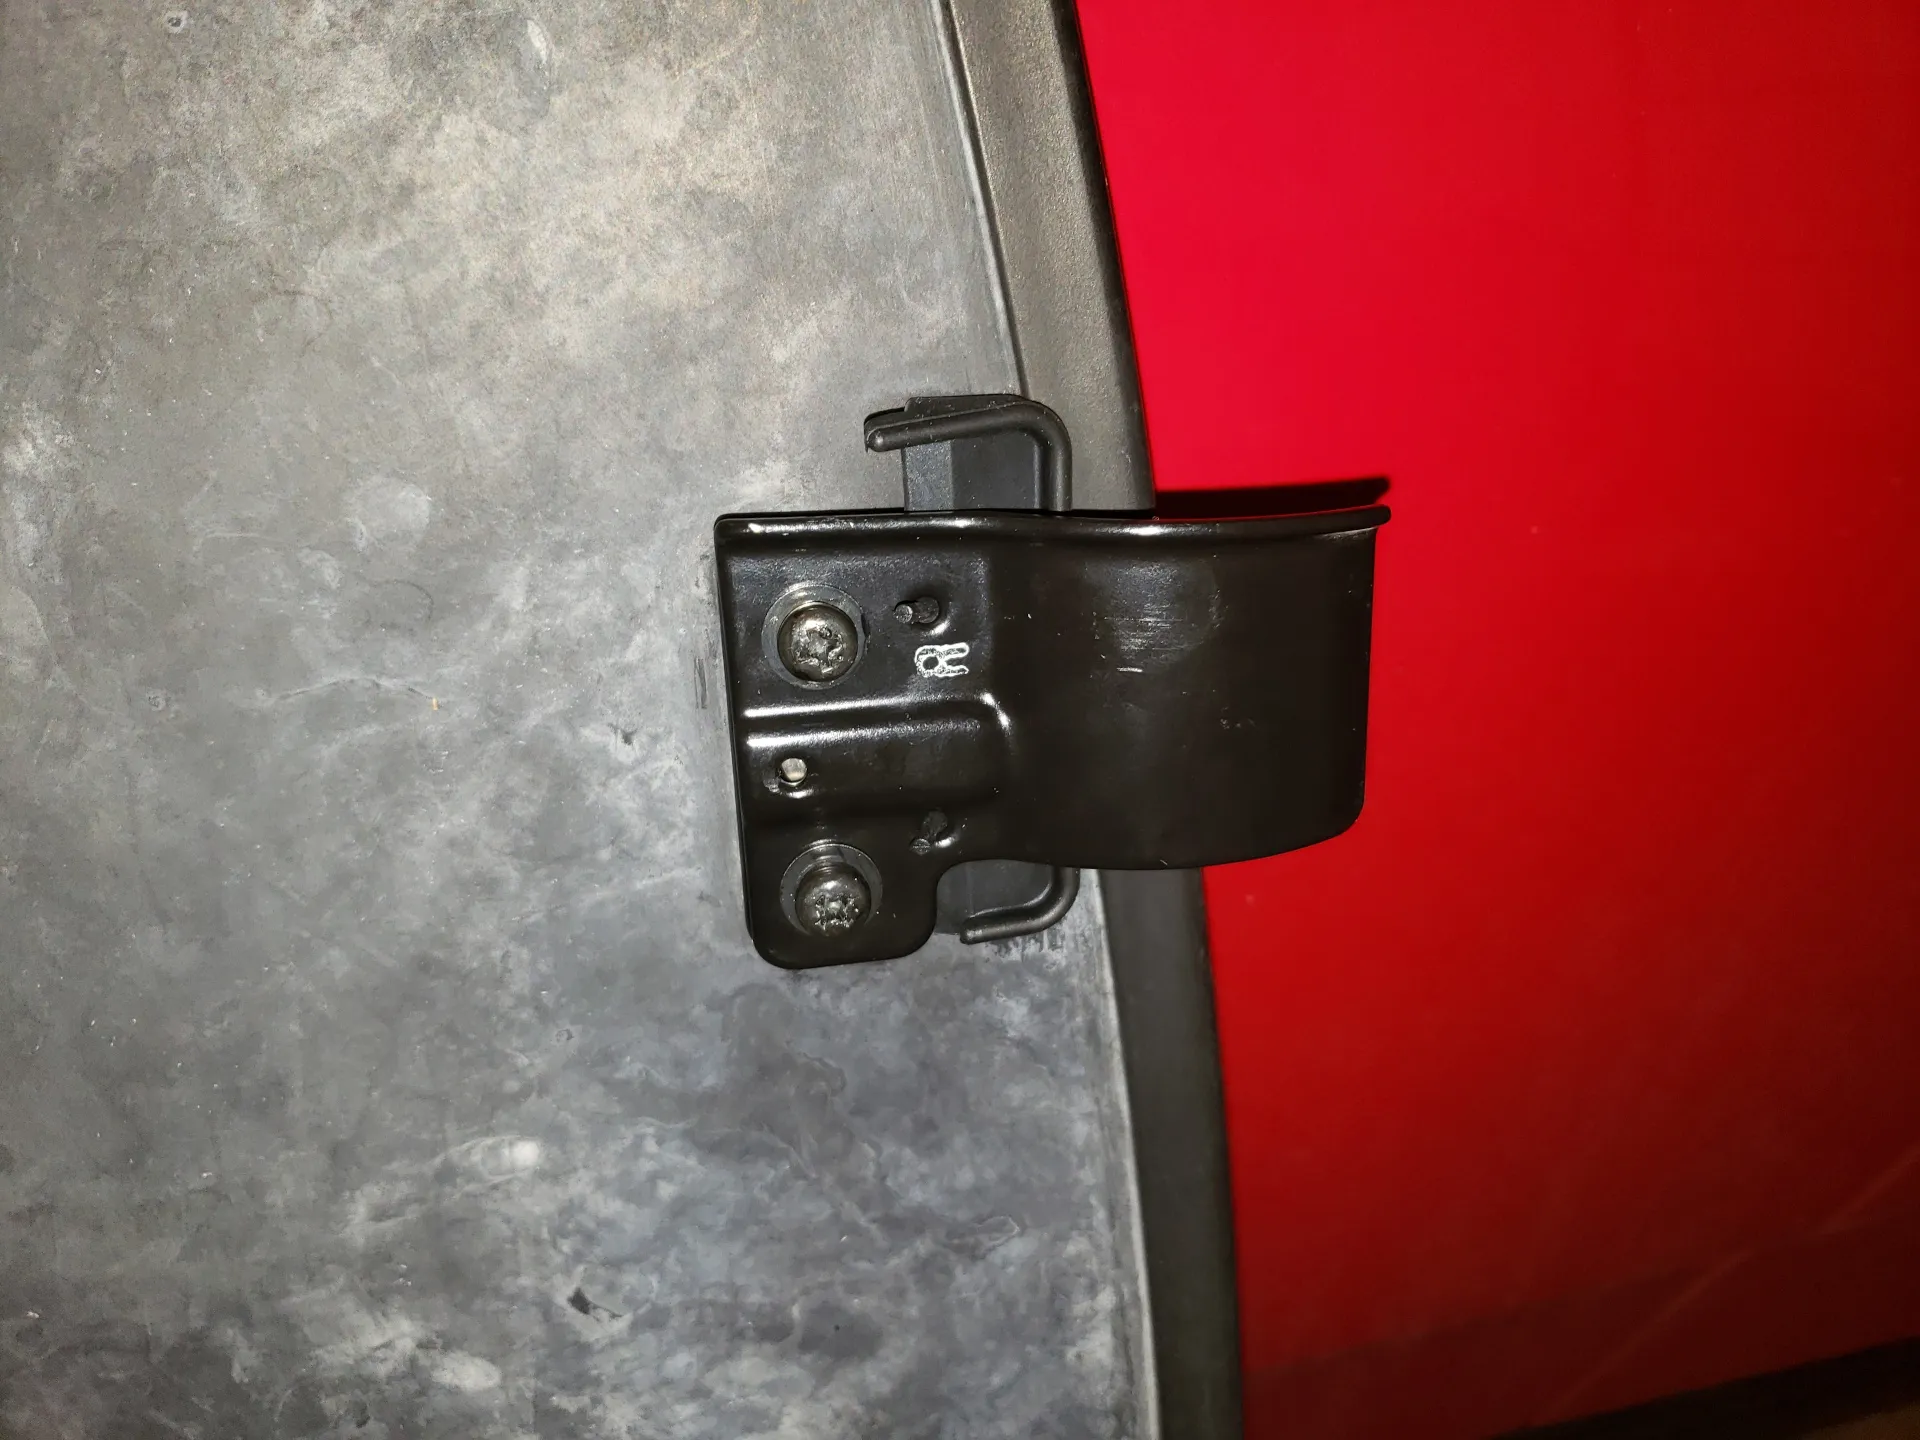 This is an example of the sunroof clip on the passenger side of the sunroof